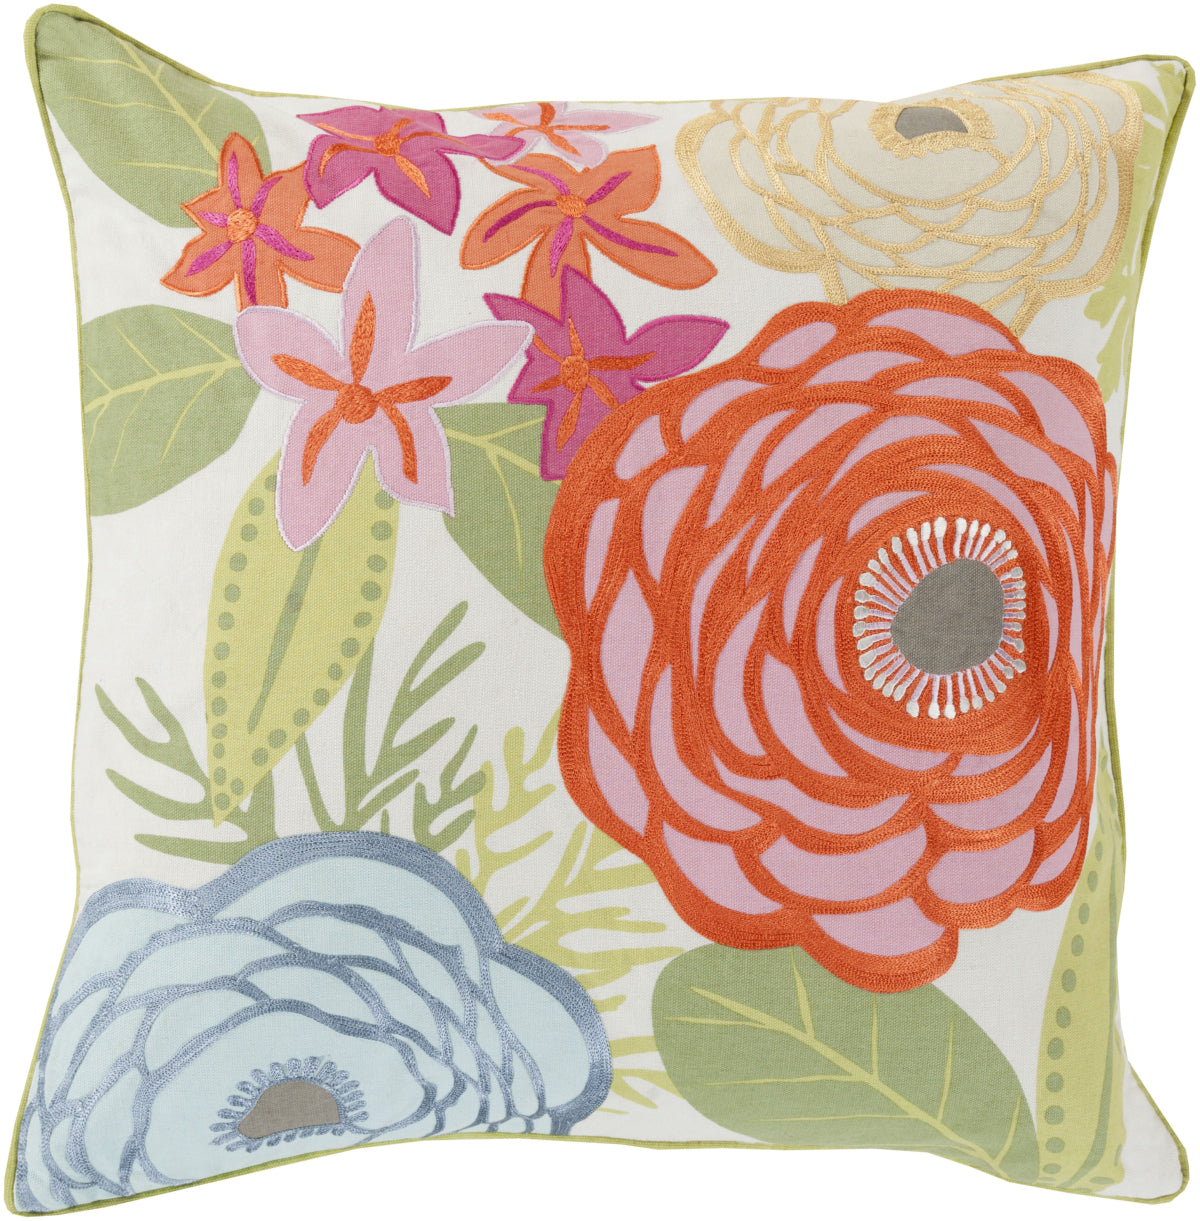 Surya Buttercup Flawlessly Floral BTC-001 Pillow by Kate Spain main image